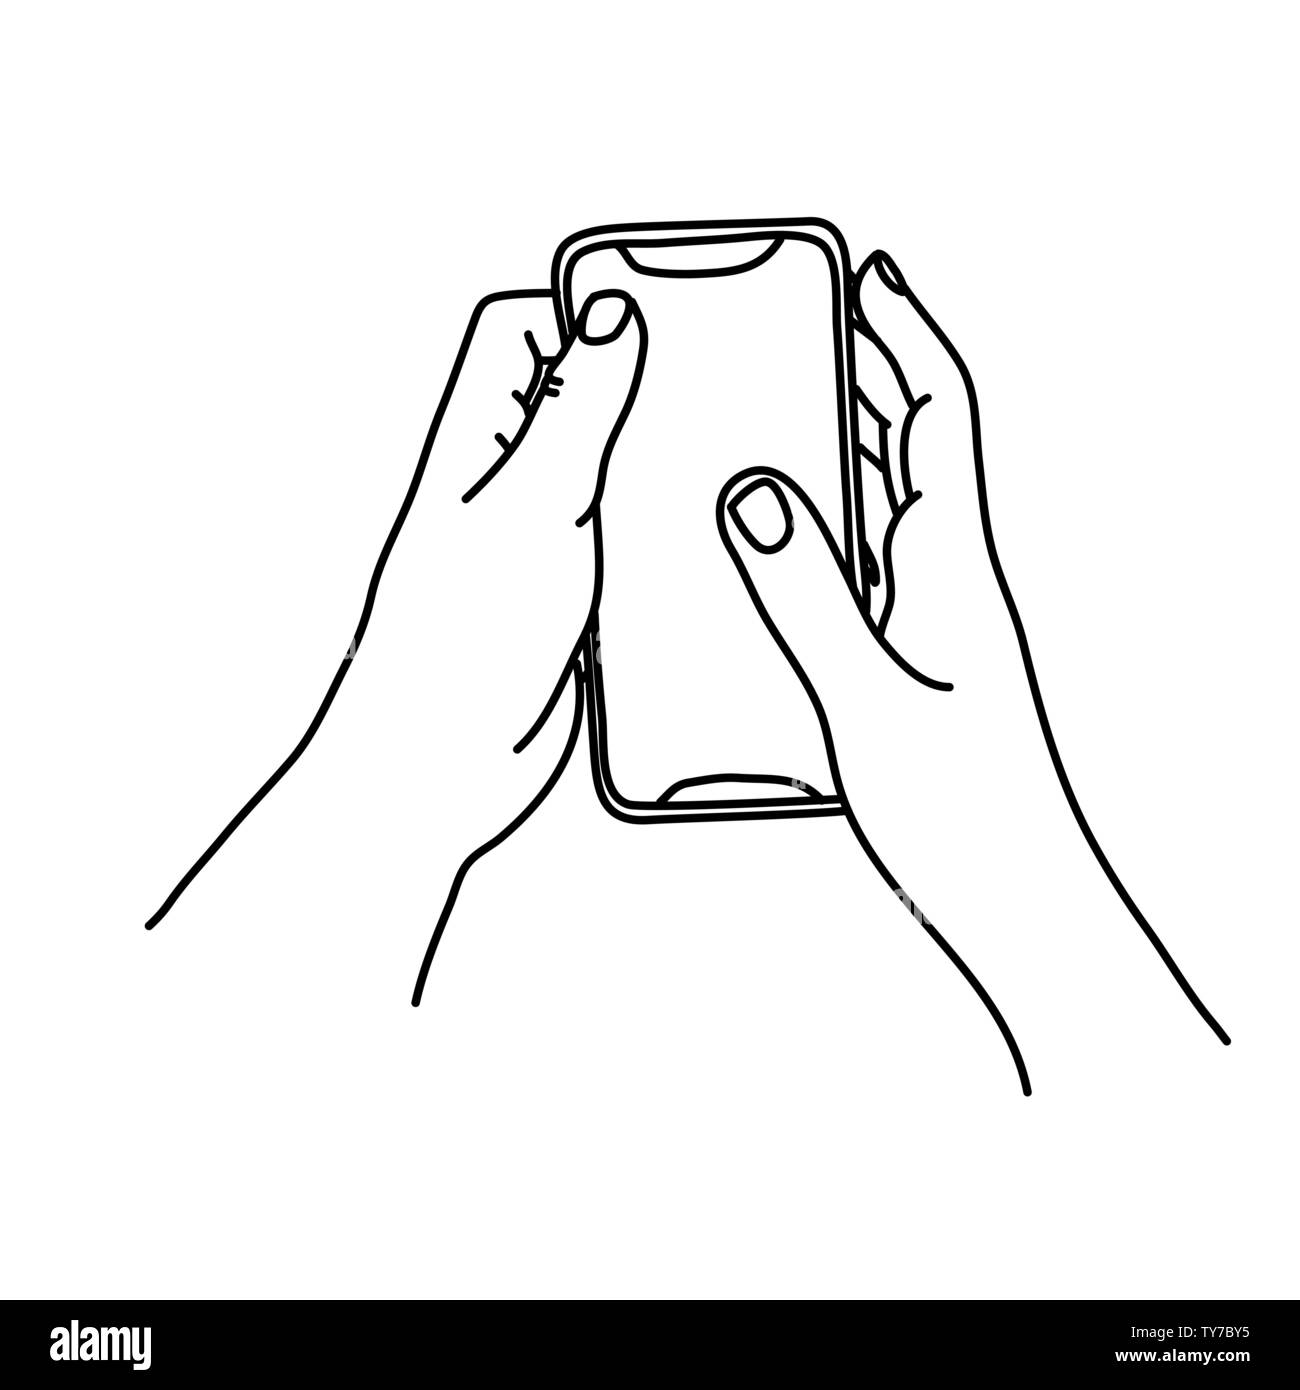 How to Draw Hand Holding Cell Phone iPhone  Smart Phone in Easy Step by  Step Drawing Tutorial  YouTube